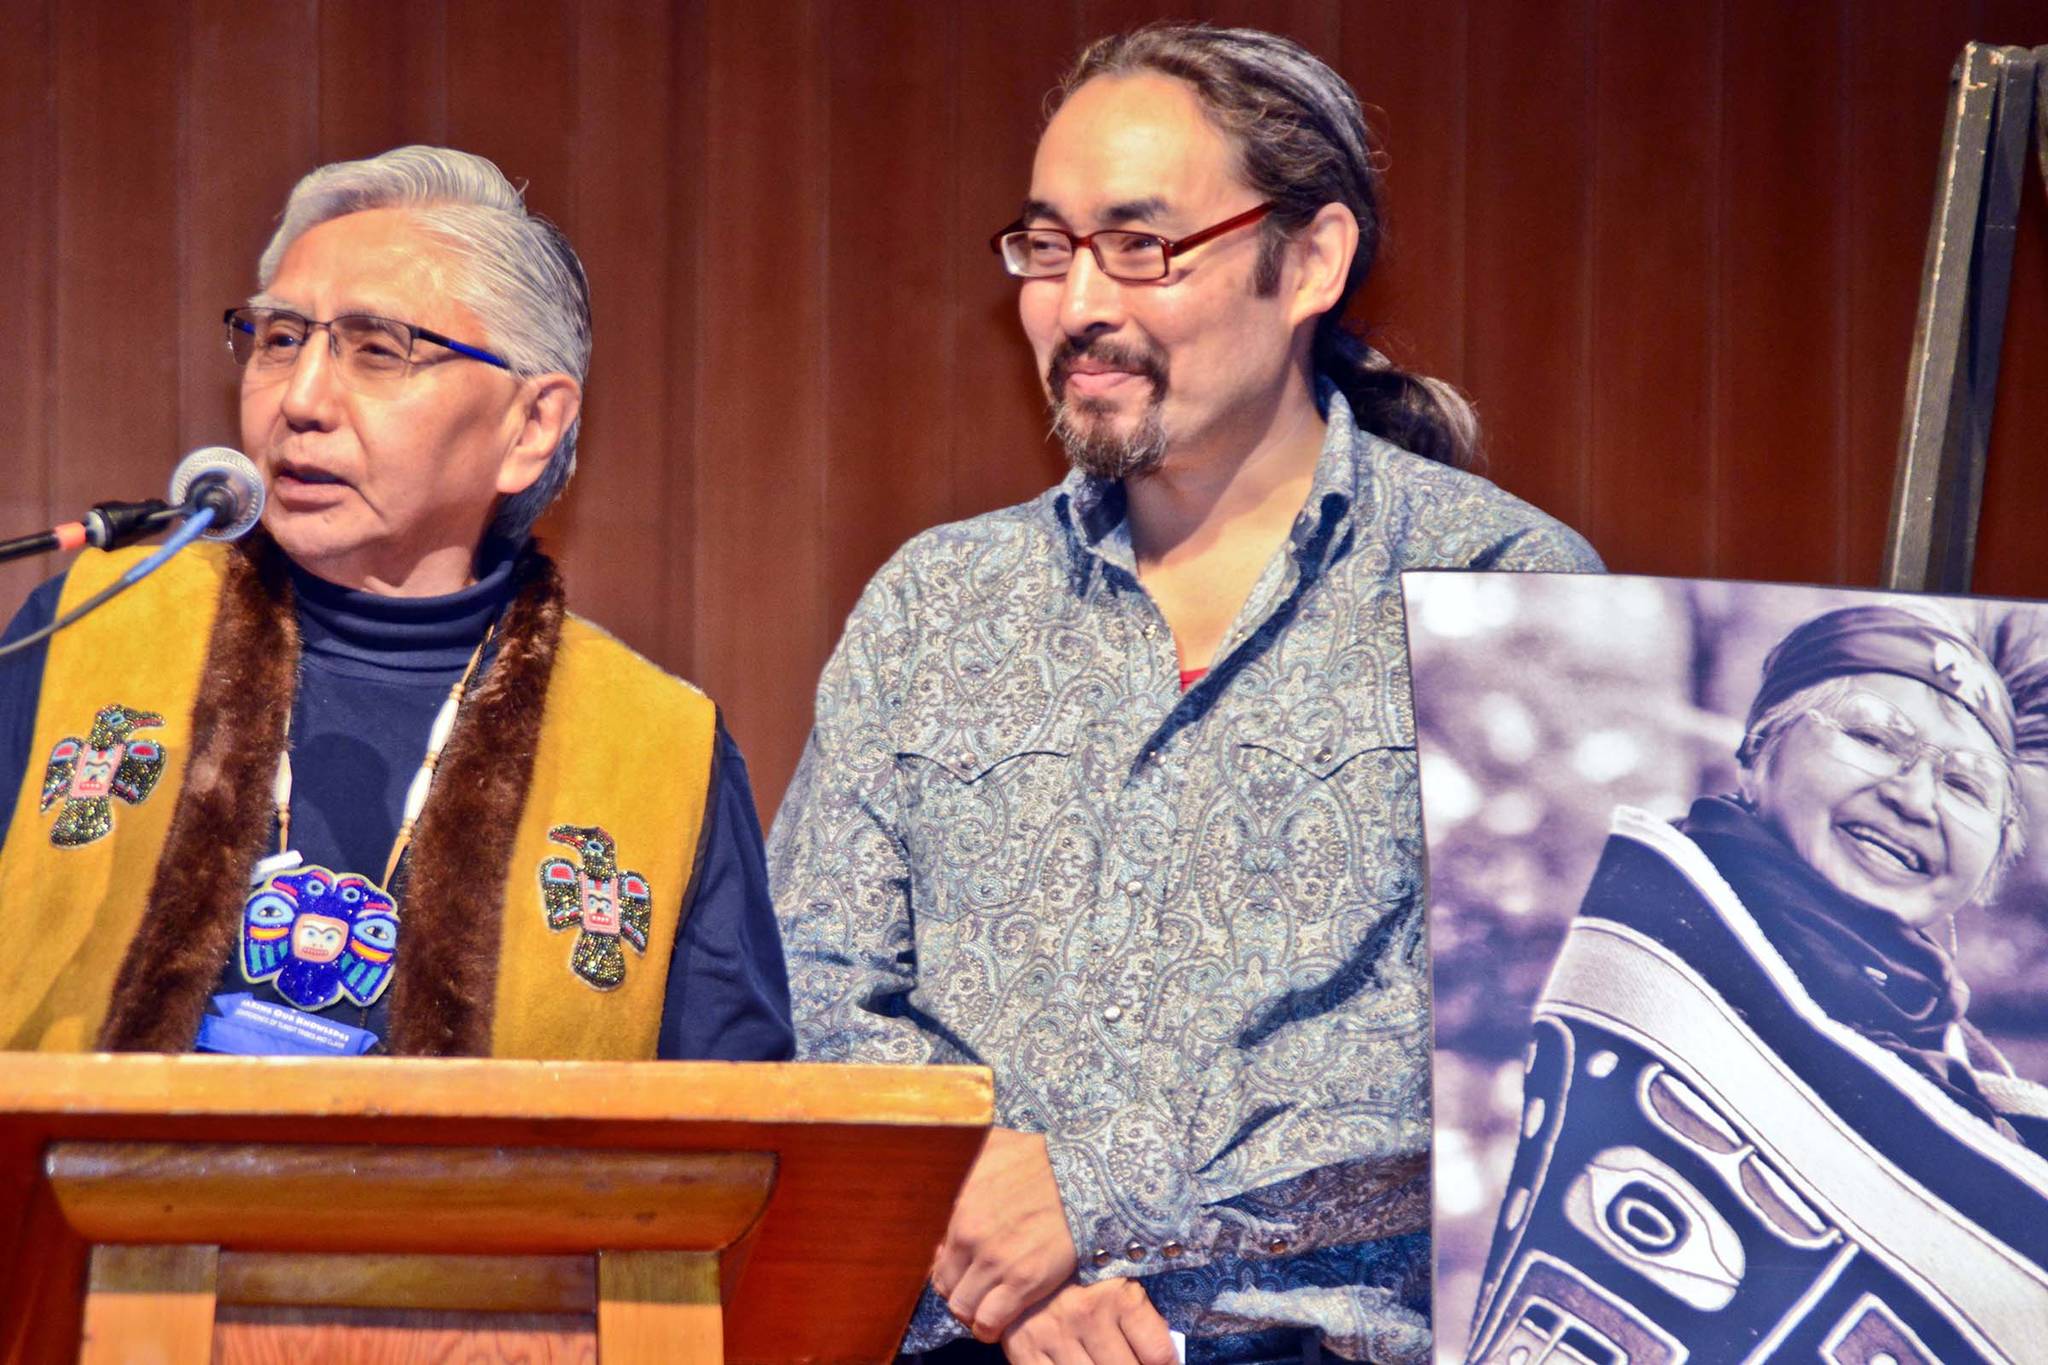 Paul Marks and Ishmael Hope speak during a banquet tribute to the late Nora Marks Dauenhauer, who is seen in the photo to Hope’s right. in this 2017 photo. (Courtesy Photo | Peter Metcalfe)